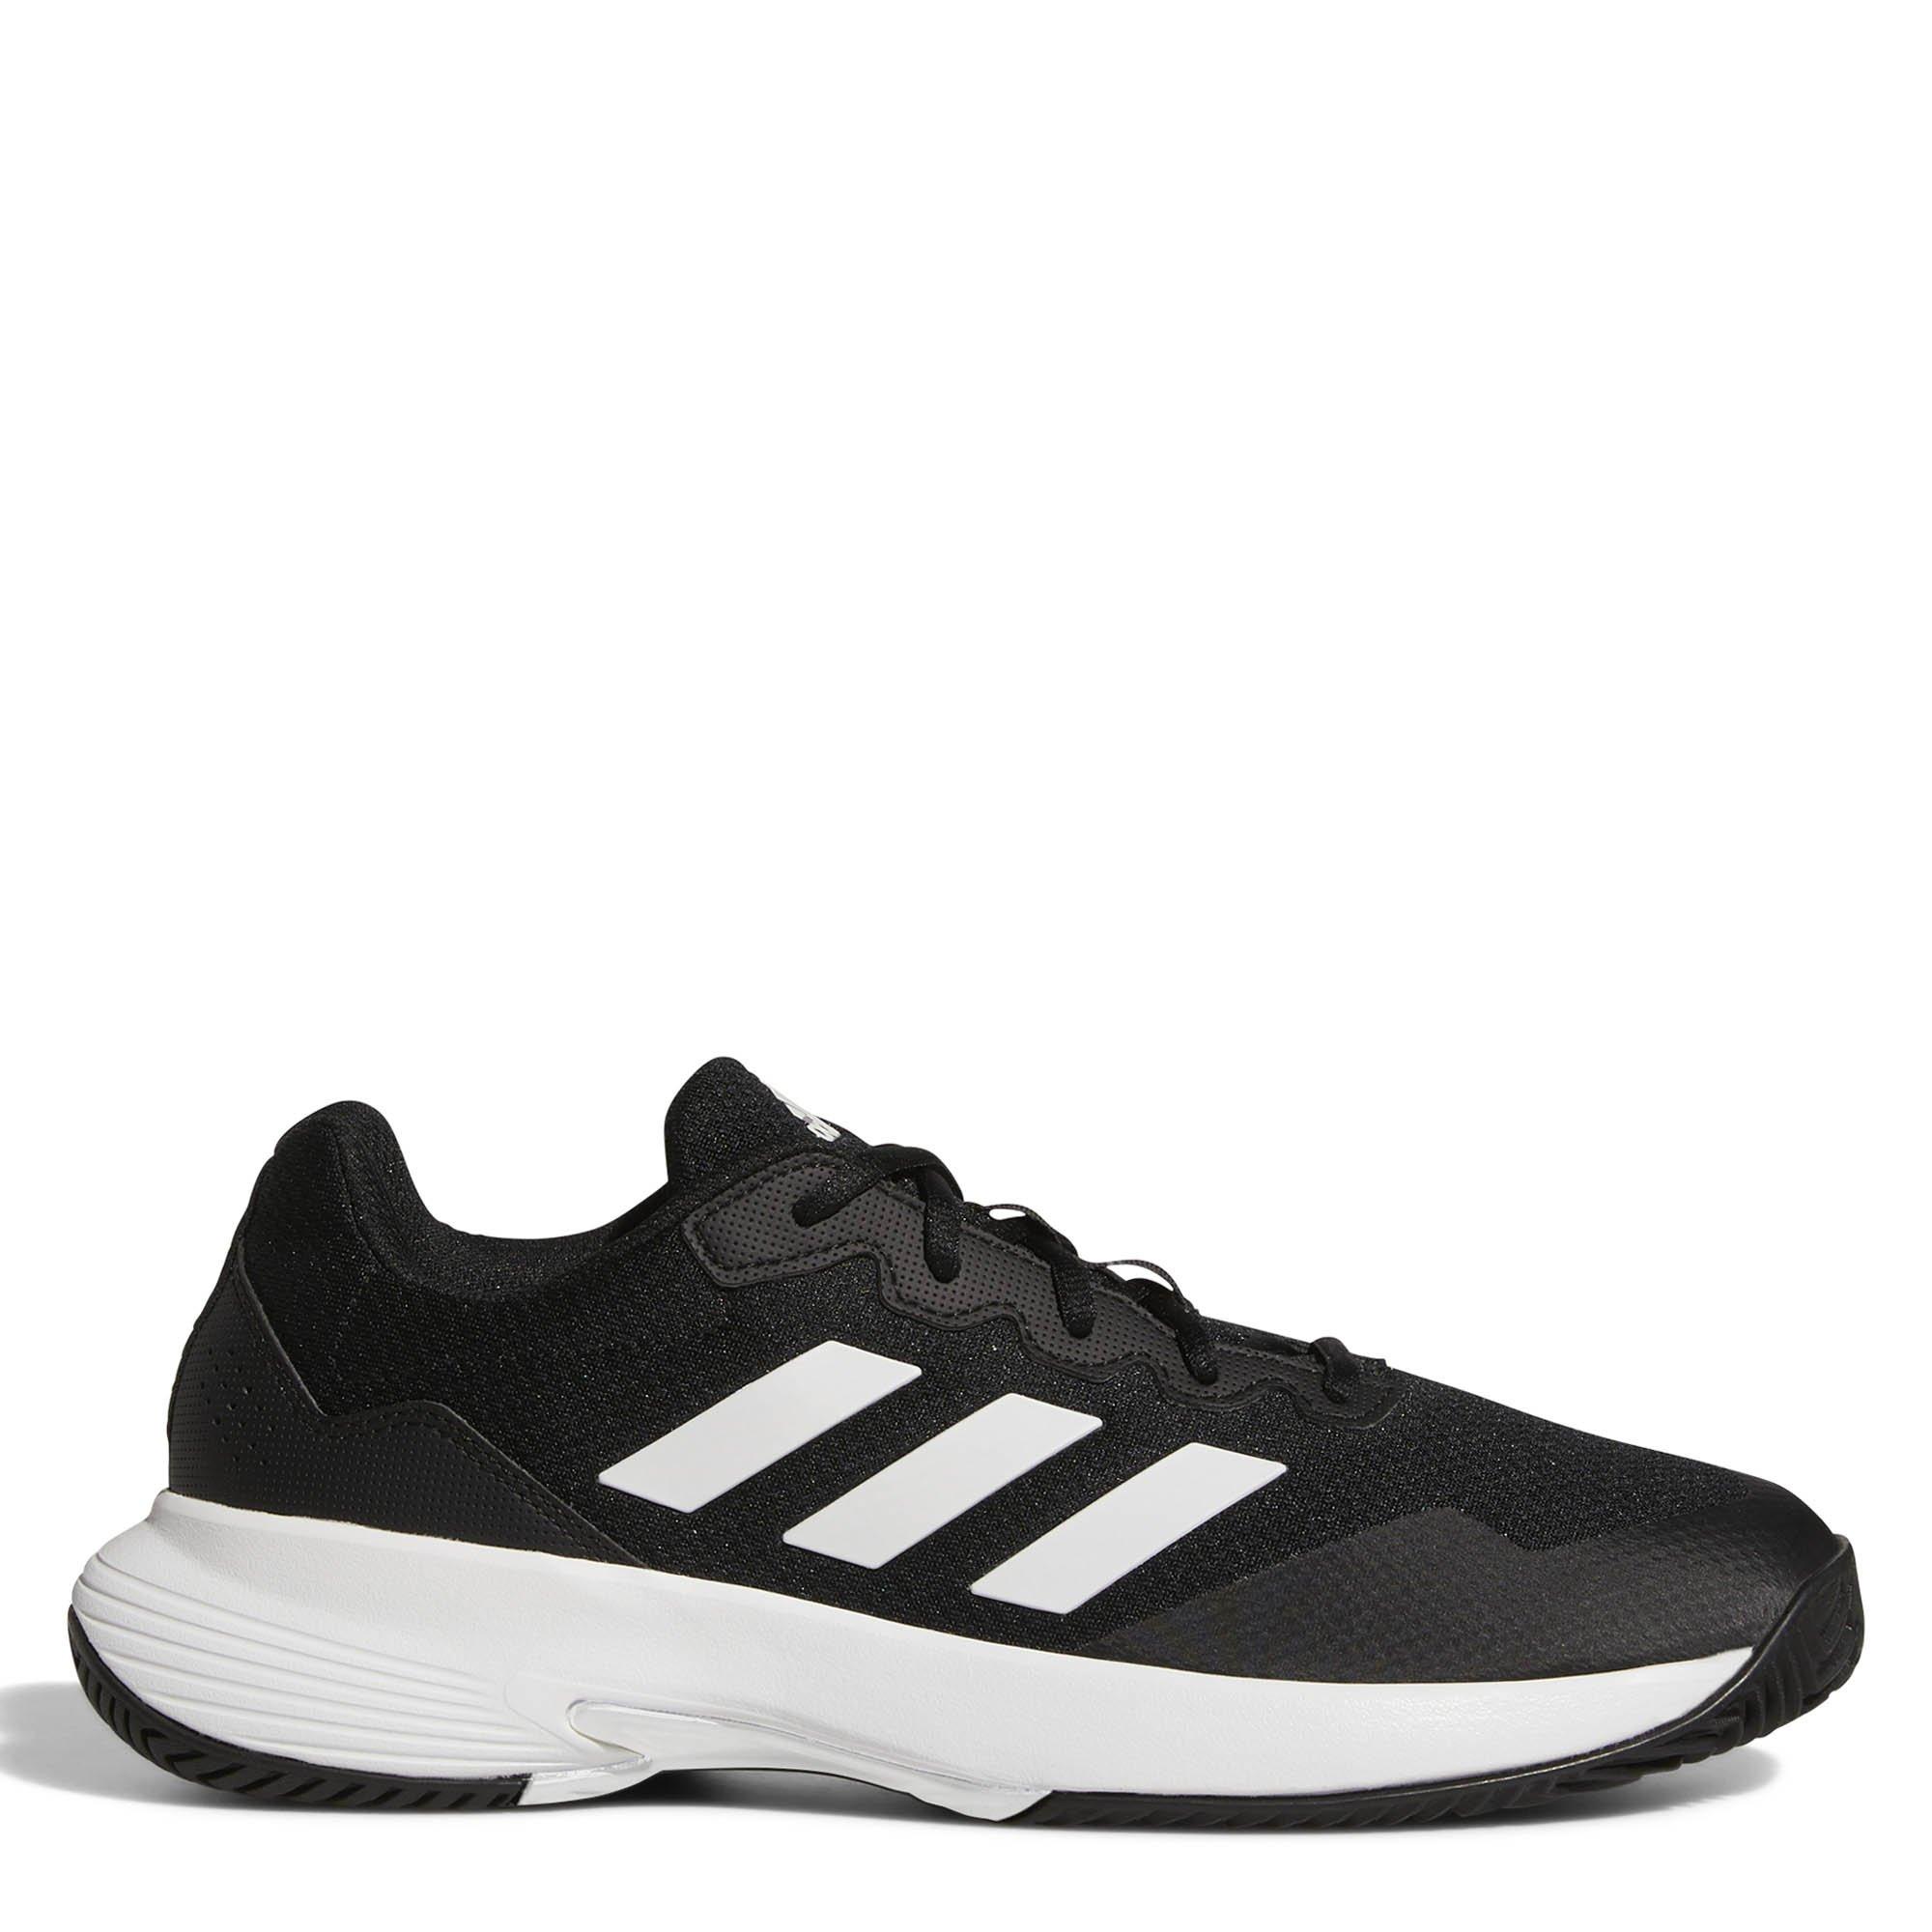 adidas | Game Court 2.0 Mens Tennis Shoes | Tennis Shoes | Sports Direct MY